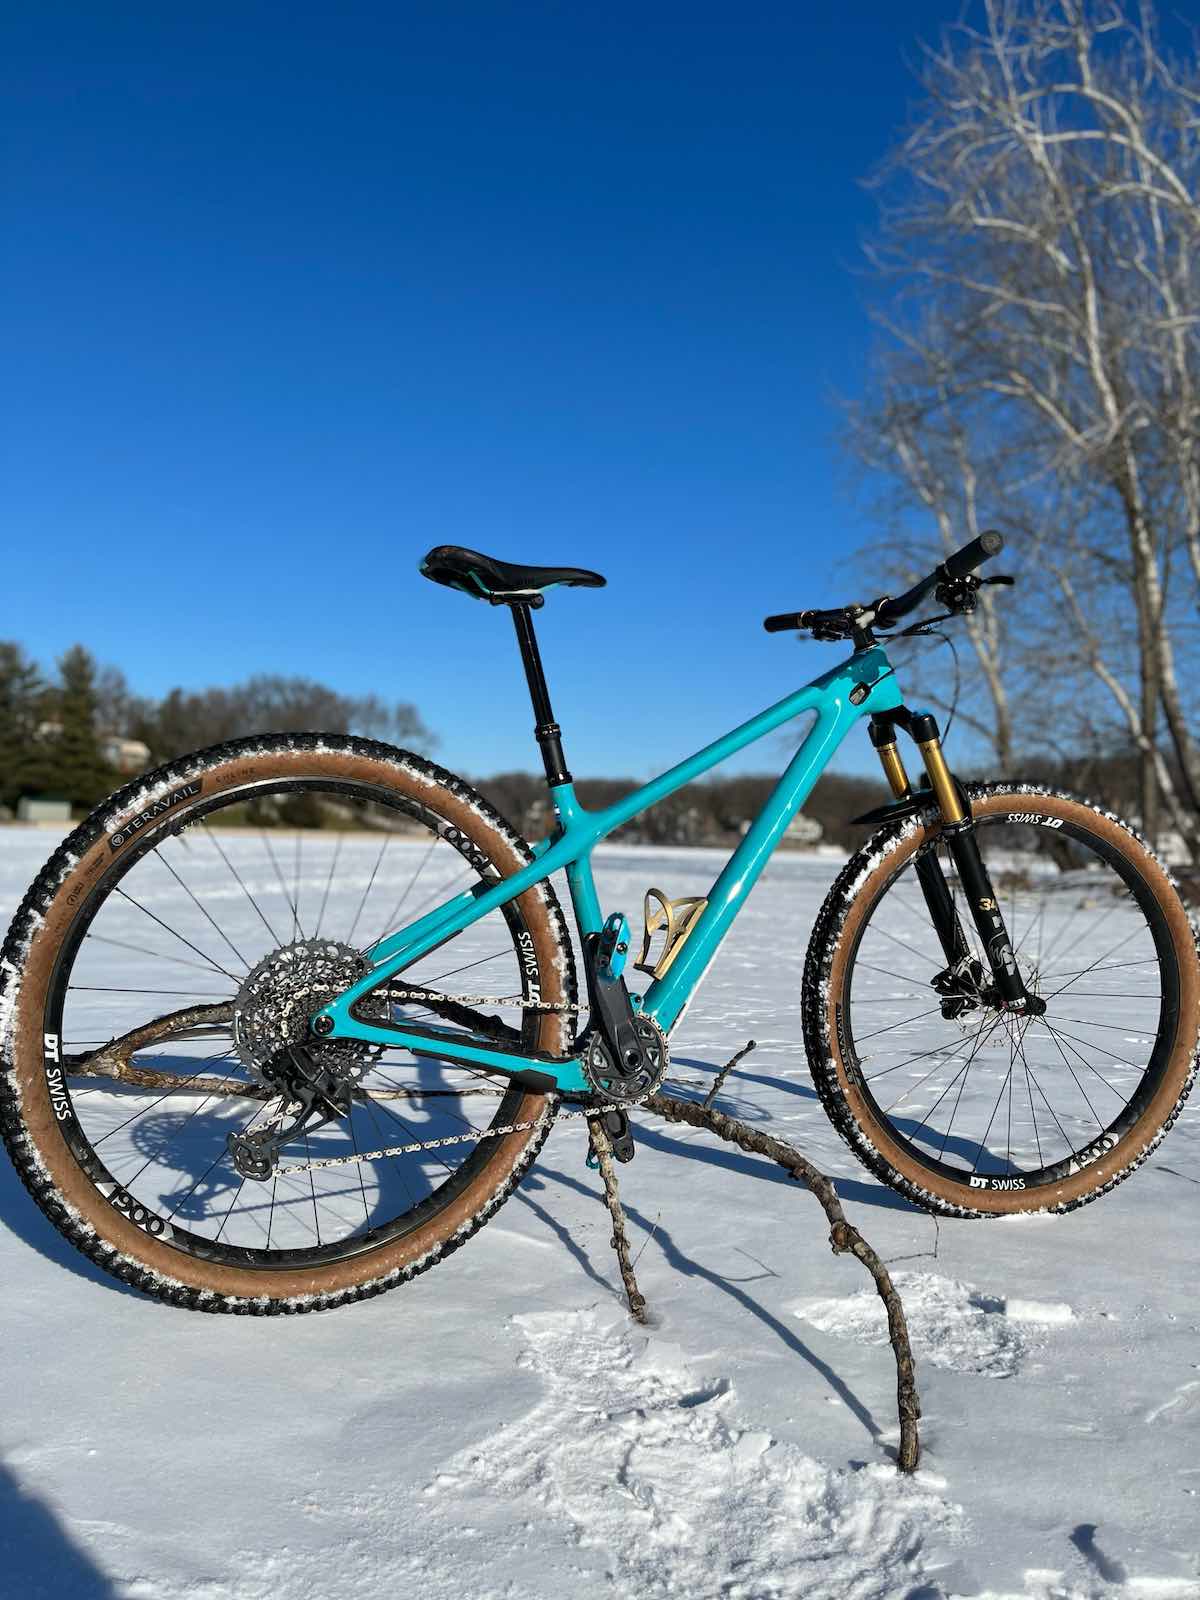 bikerumor pic of the day a mountain bike is posed on the snow in a clearing surrounded by trees, the sky is clear and bright